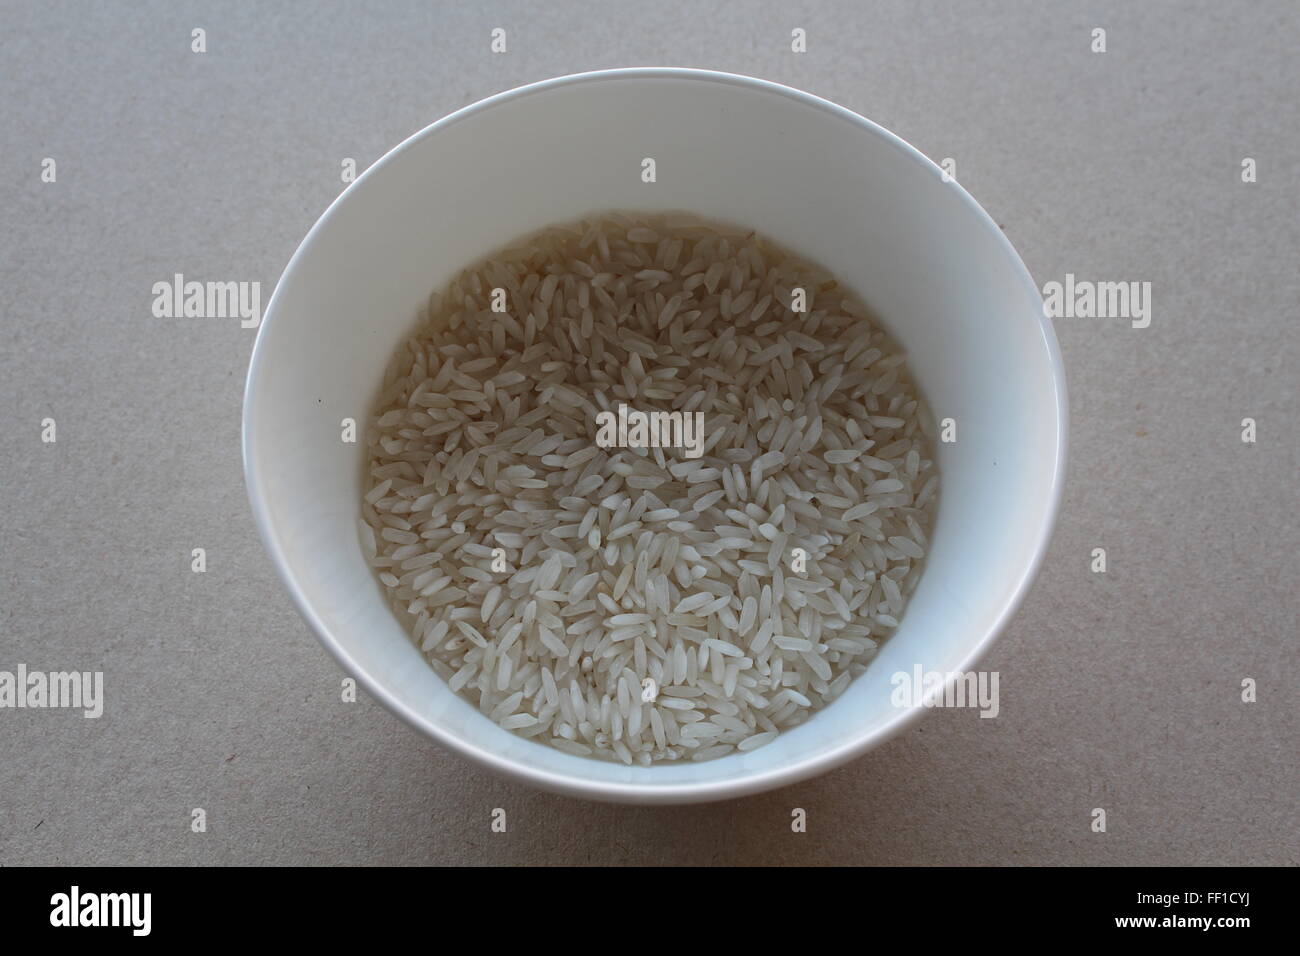 a dish with rice Stock Photo